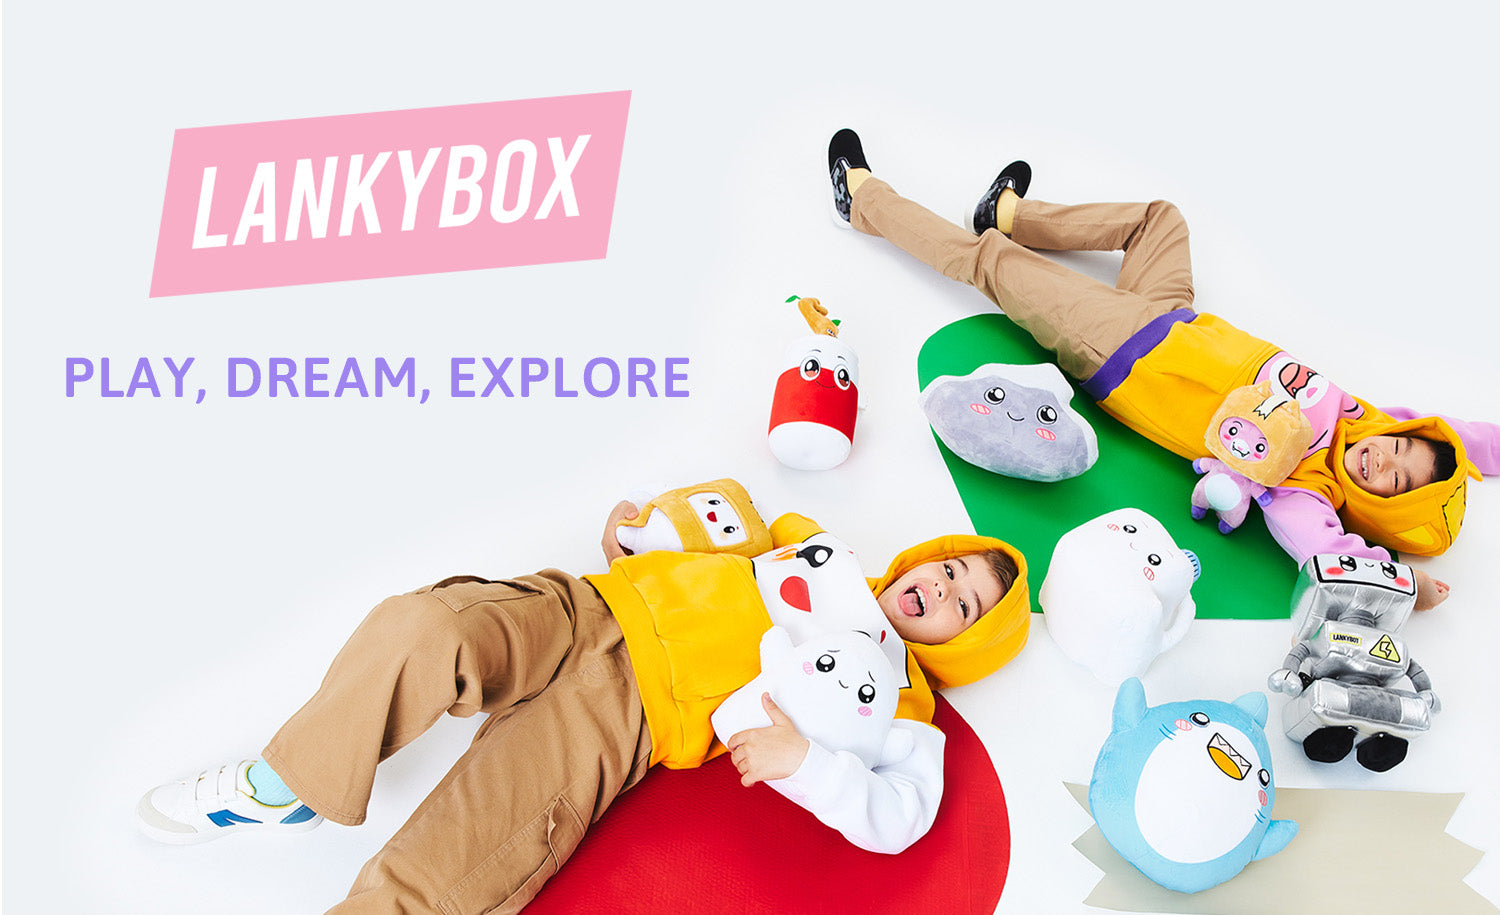 The Official LankyBox Shop